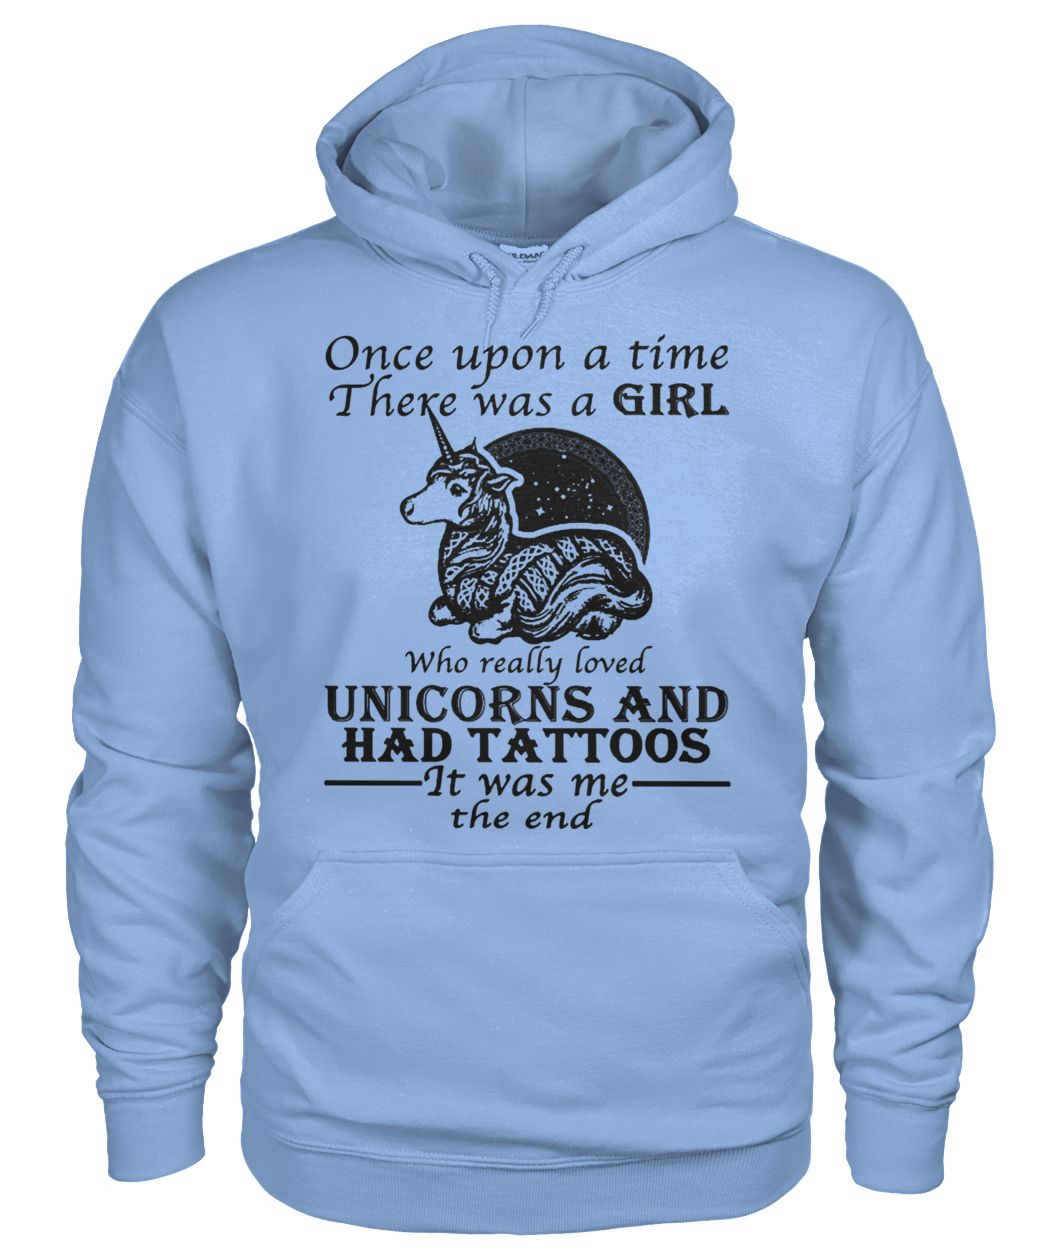 Once upon a time there was a girl who really loved unicorns and had tattoos it was me the end gildan hoodie